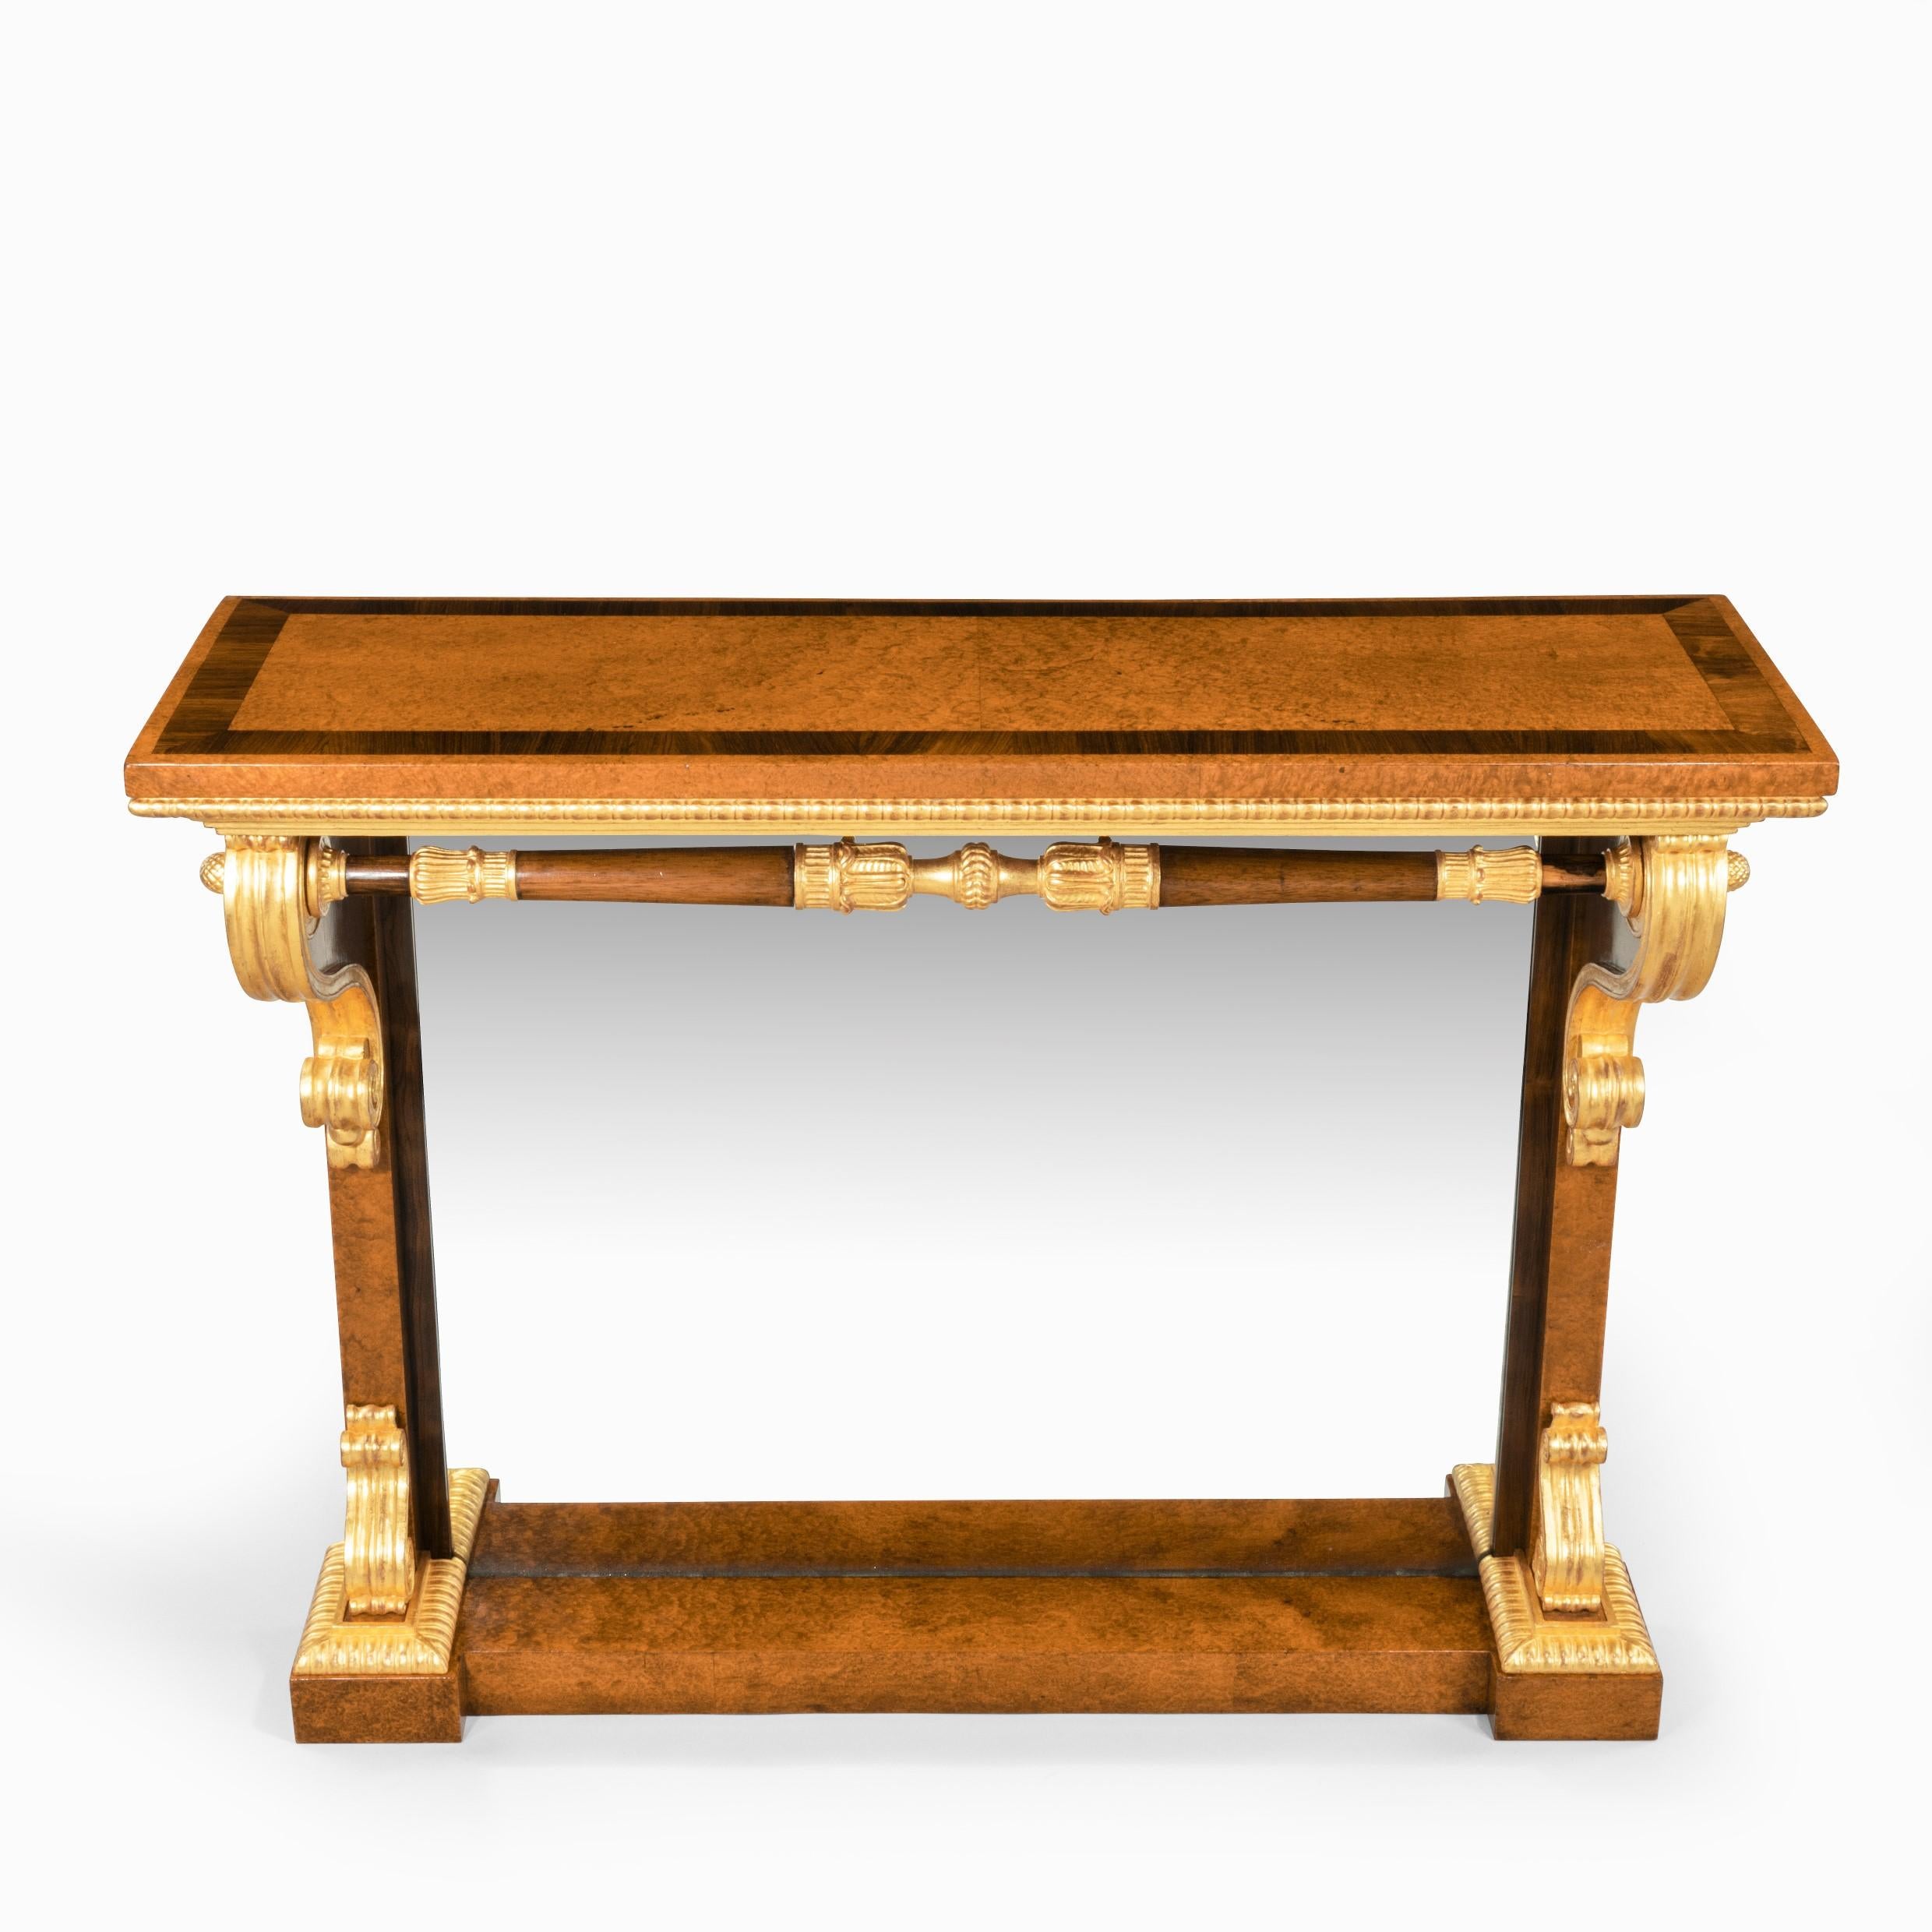 A striking George IV amboyna, rosewood and gilt console table attributed to Morel and Seddon, the rectangular top set above two monopodia with bold scrolling corbels and feet in giltwood joined by a turned and parcel stretcher set into the corbels,